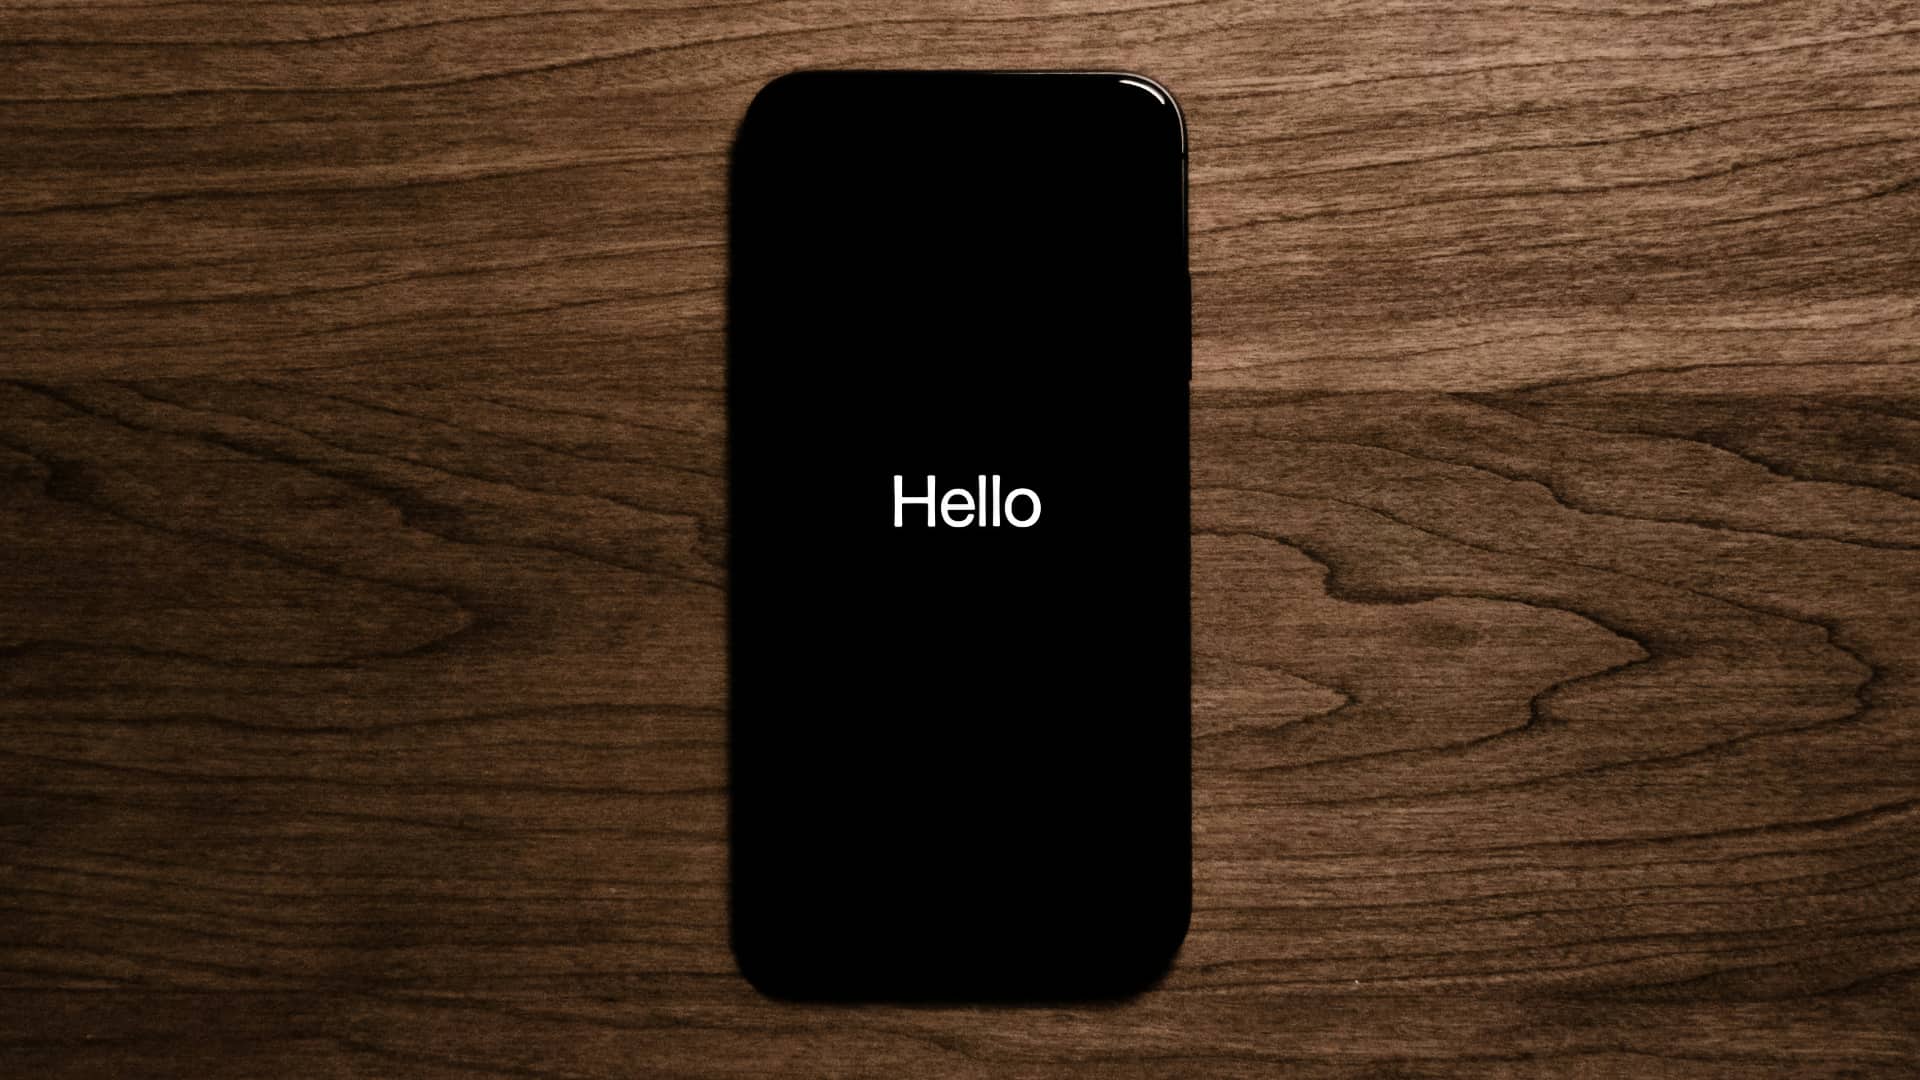 iPhone on wooden surface, displaying a Hello message on the screen